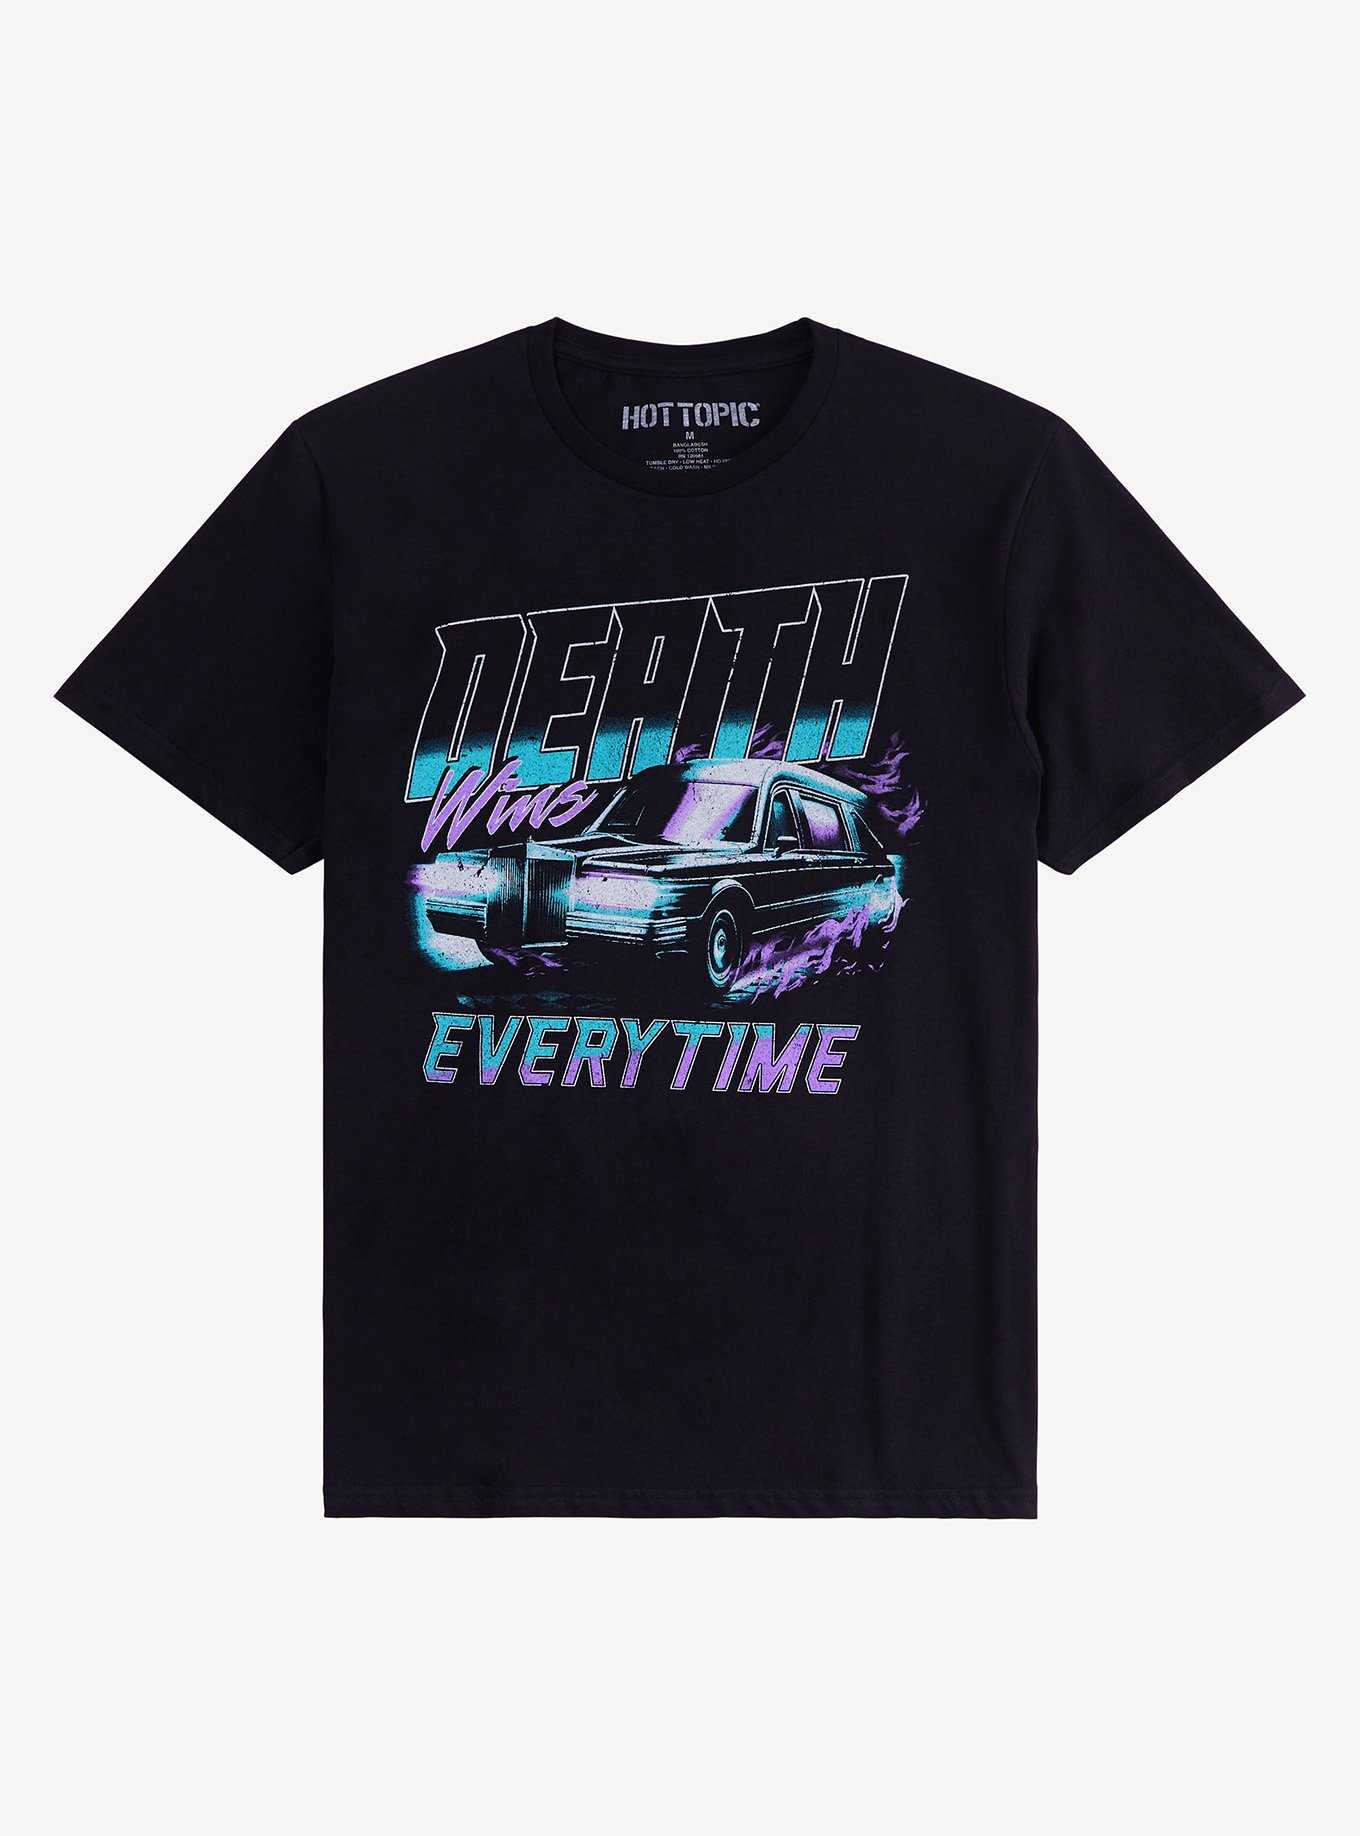 Death Wins Every Time T-Shirt, , hi-res